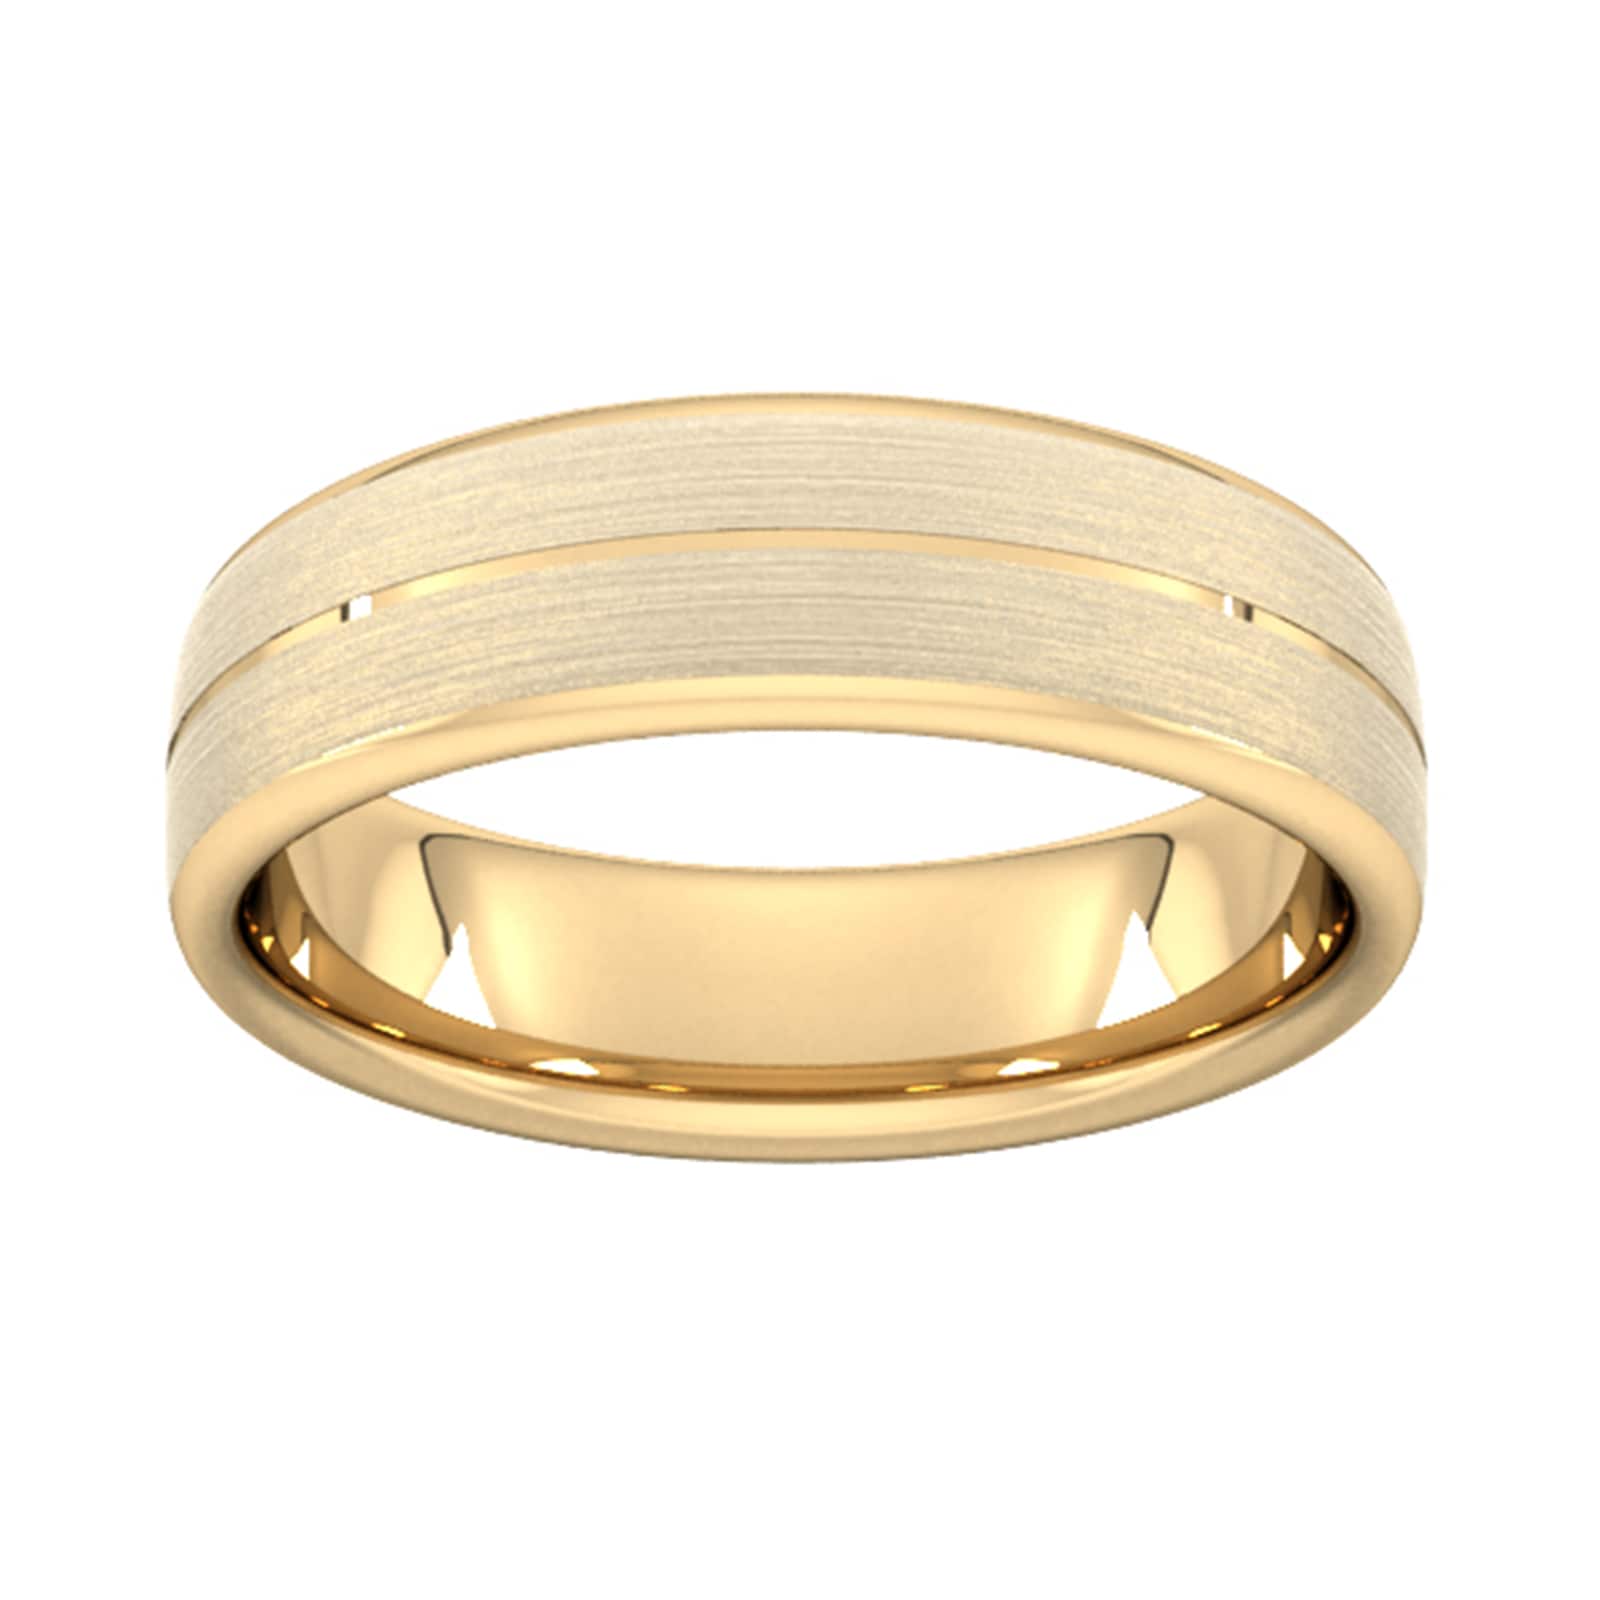 6mm Traditional Court Standard Centre Groove With Chamfered Edge Wedding Ring In 9 Carat Yellow Gold - Ring Size U